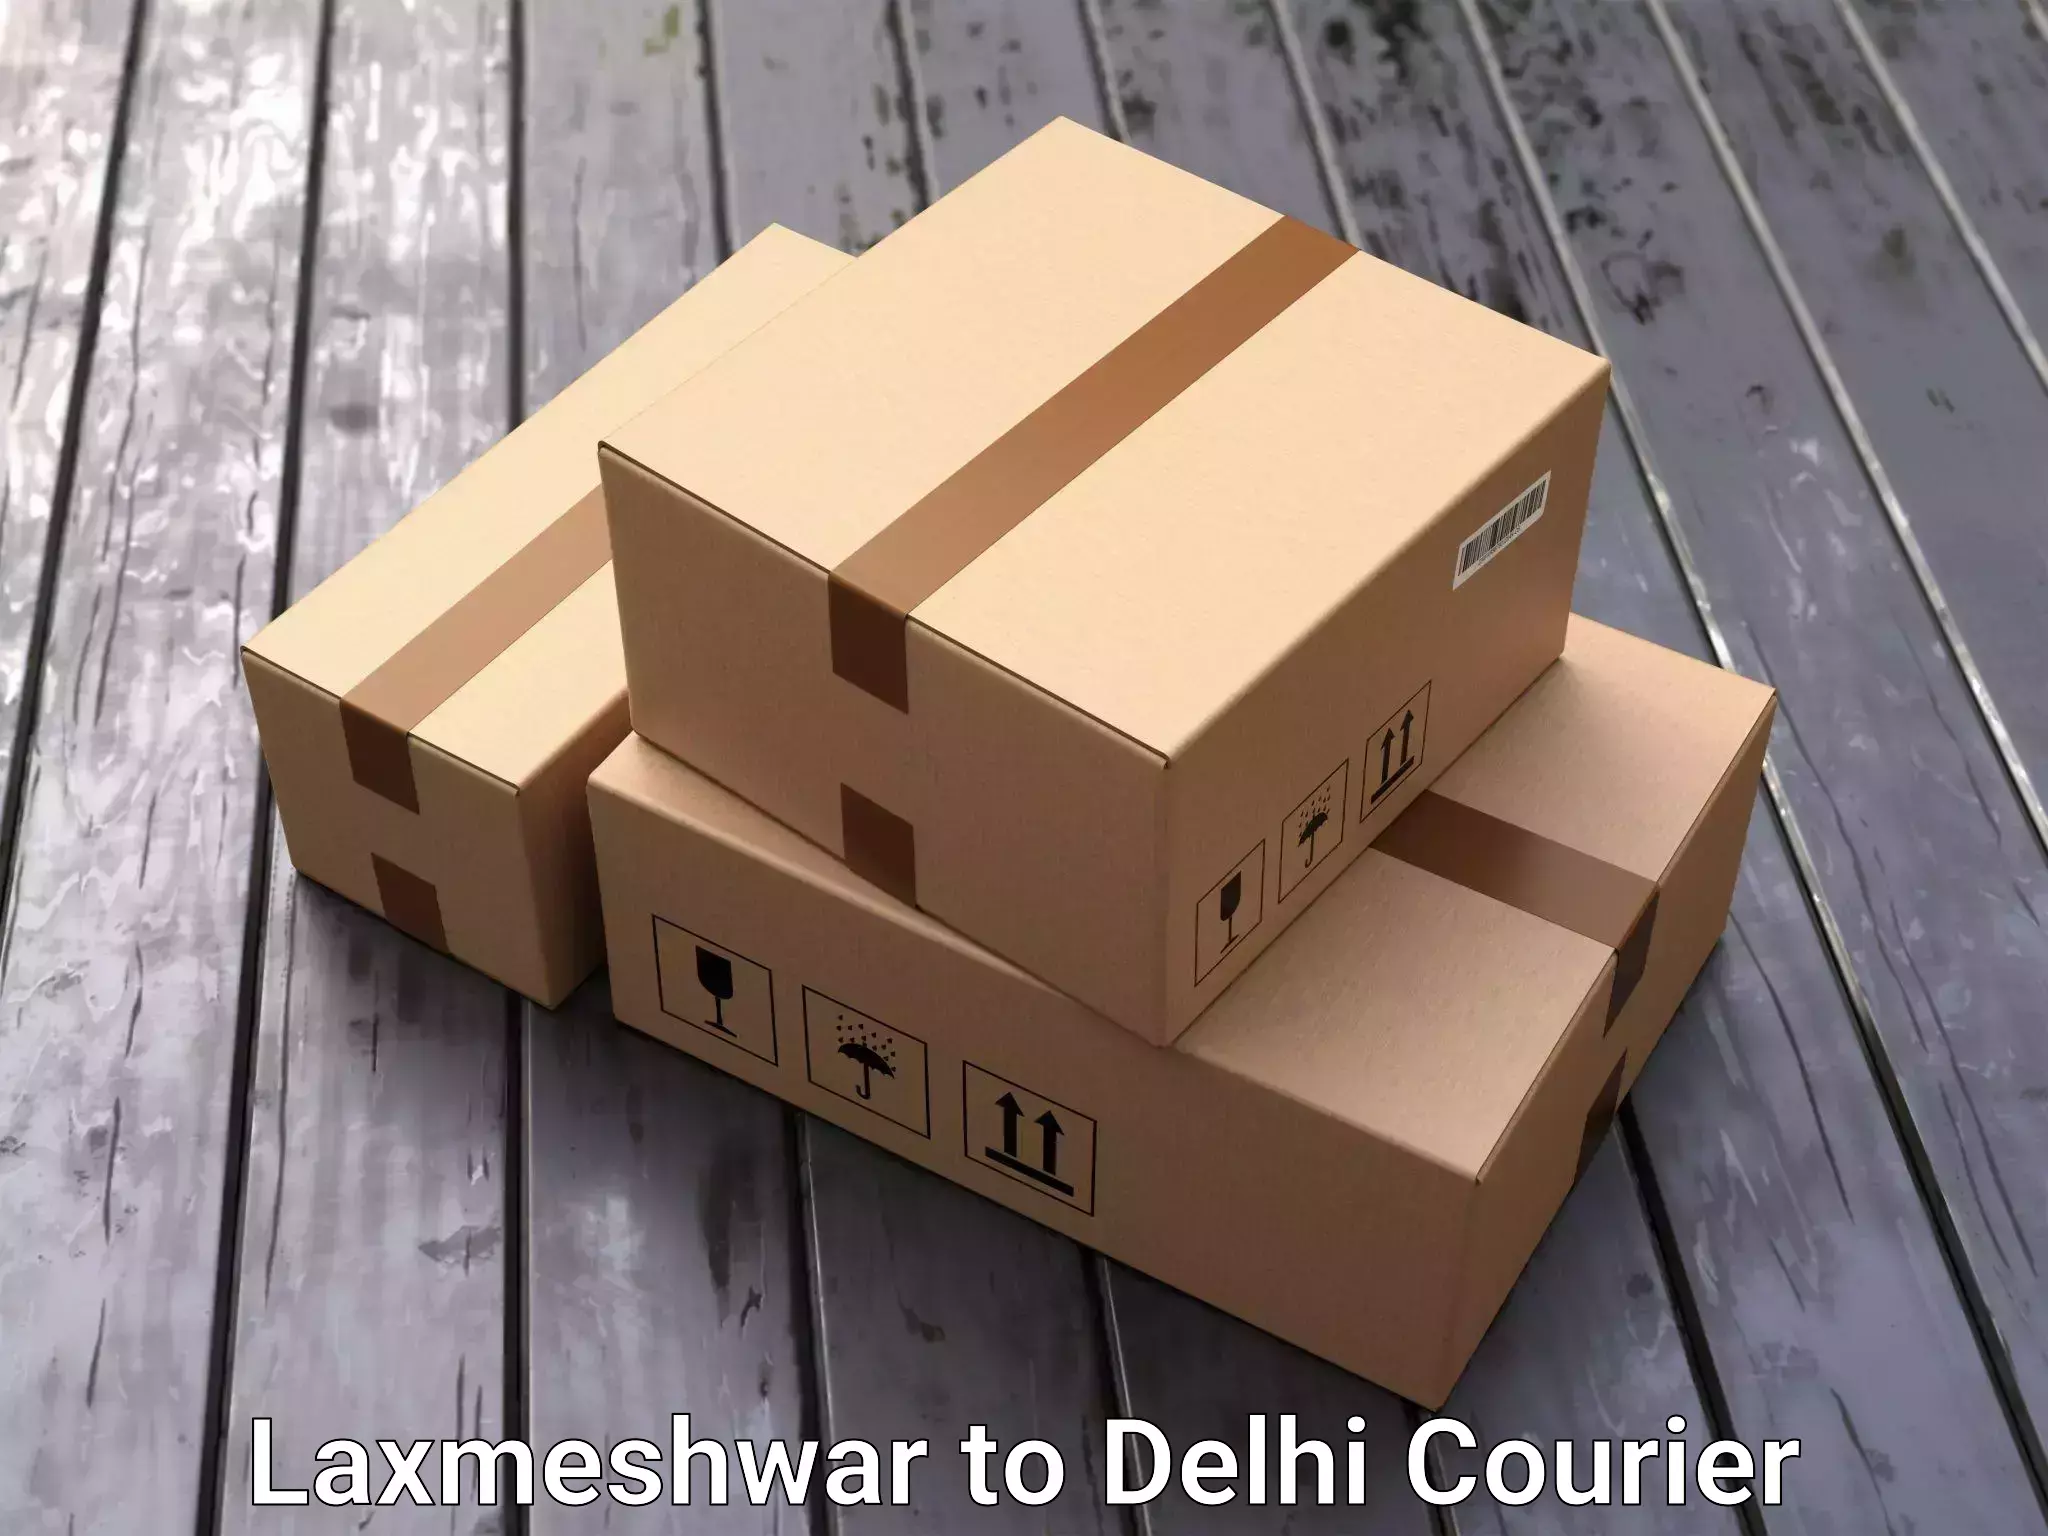 Quality relocation assistance Laxmeshwar to Lodhi Road